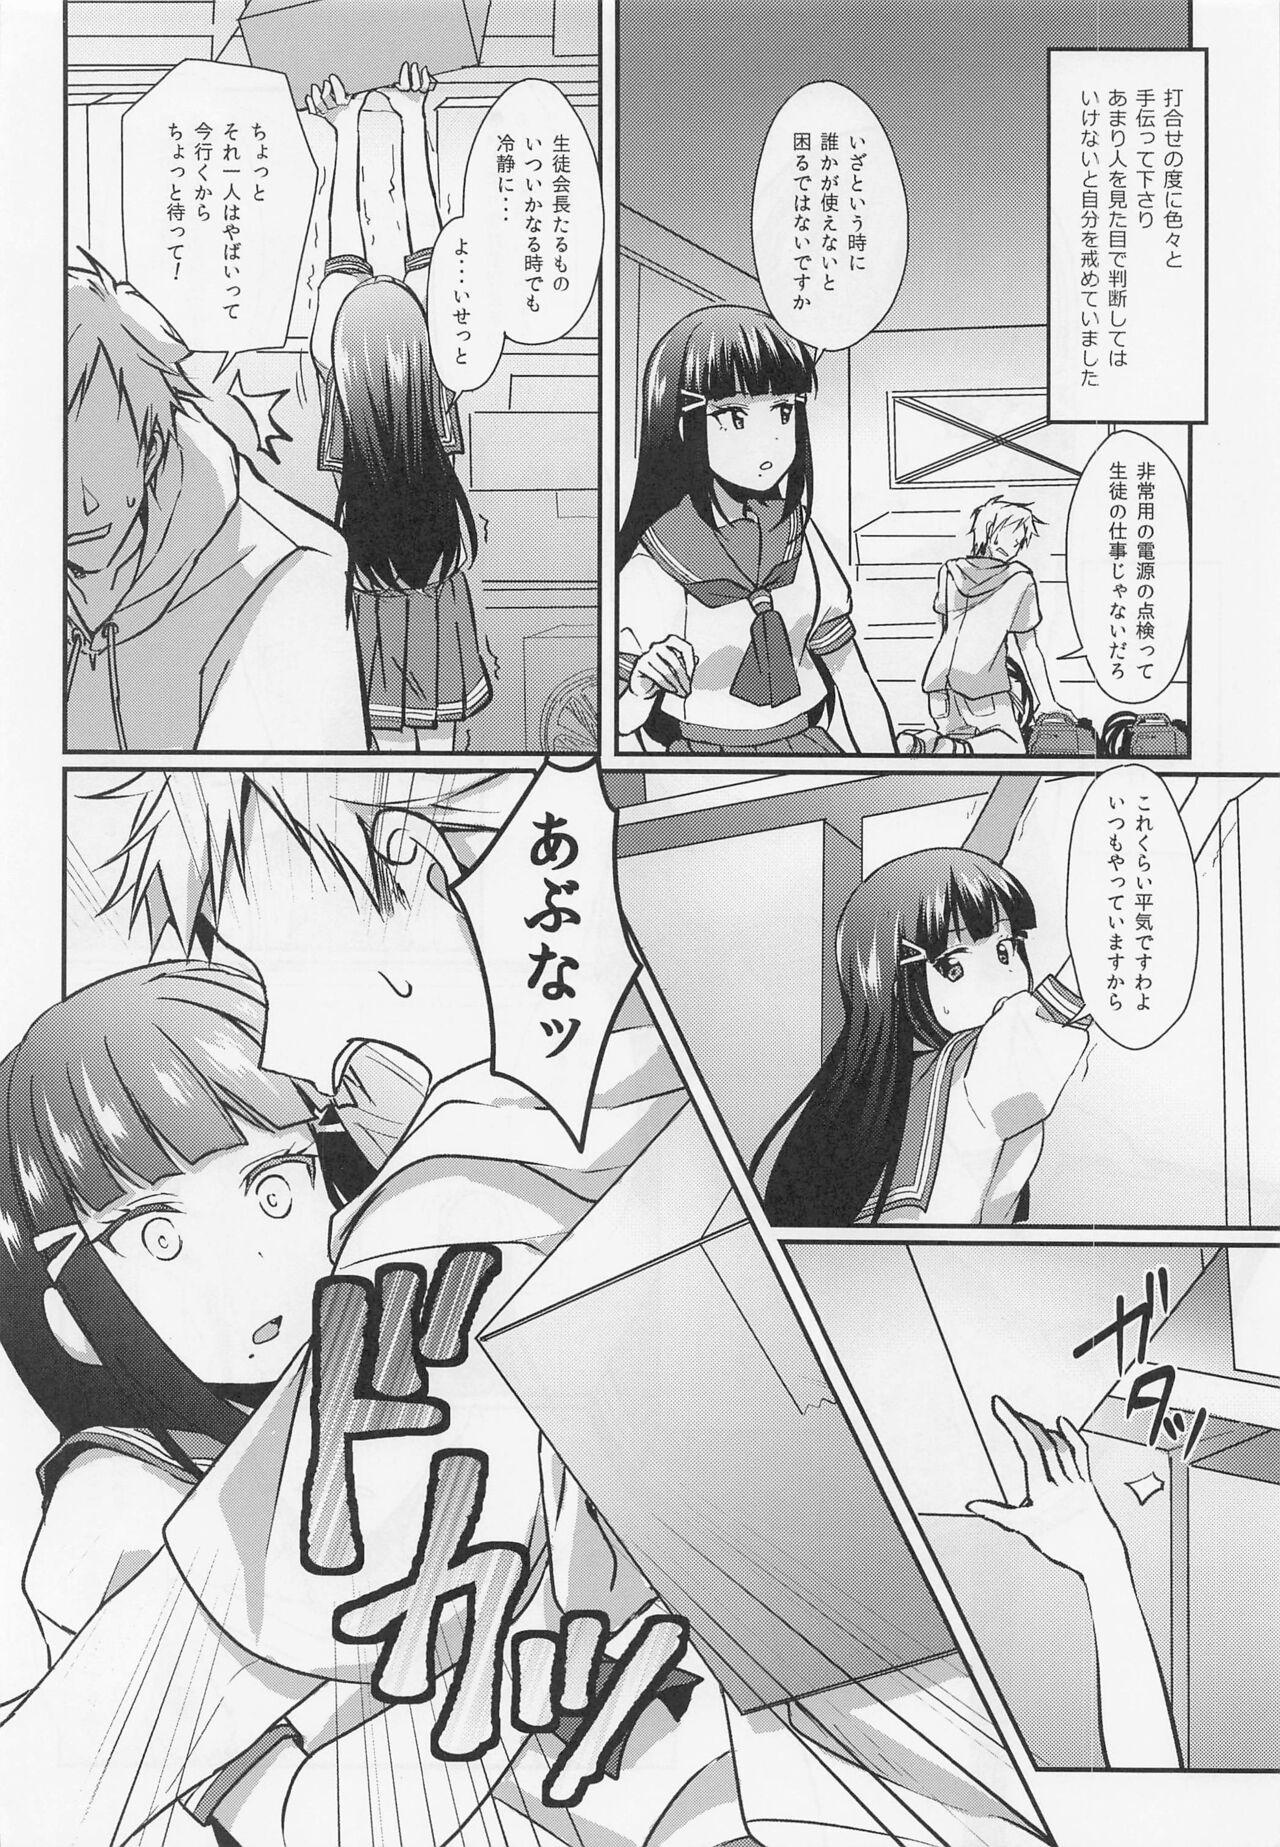 Mas Boiling First Love - Love live sunshine Babe - Page 5